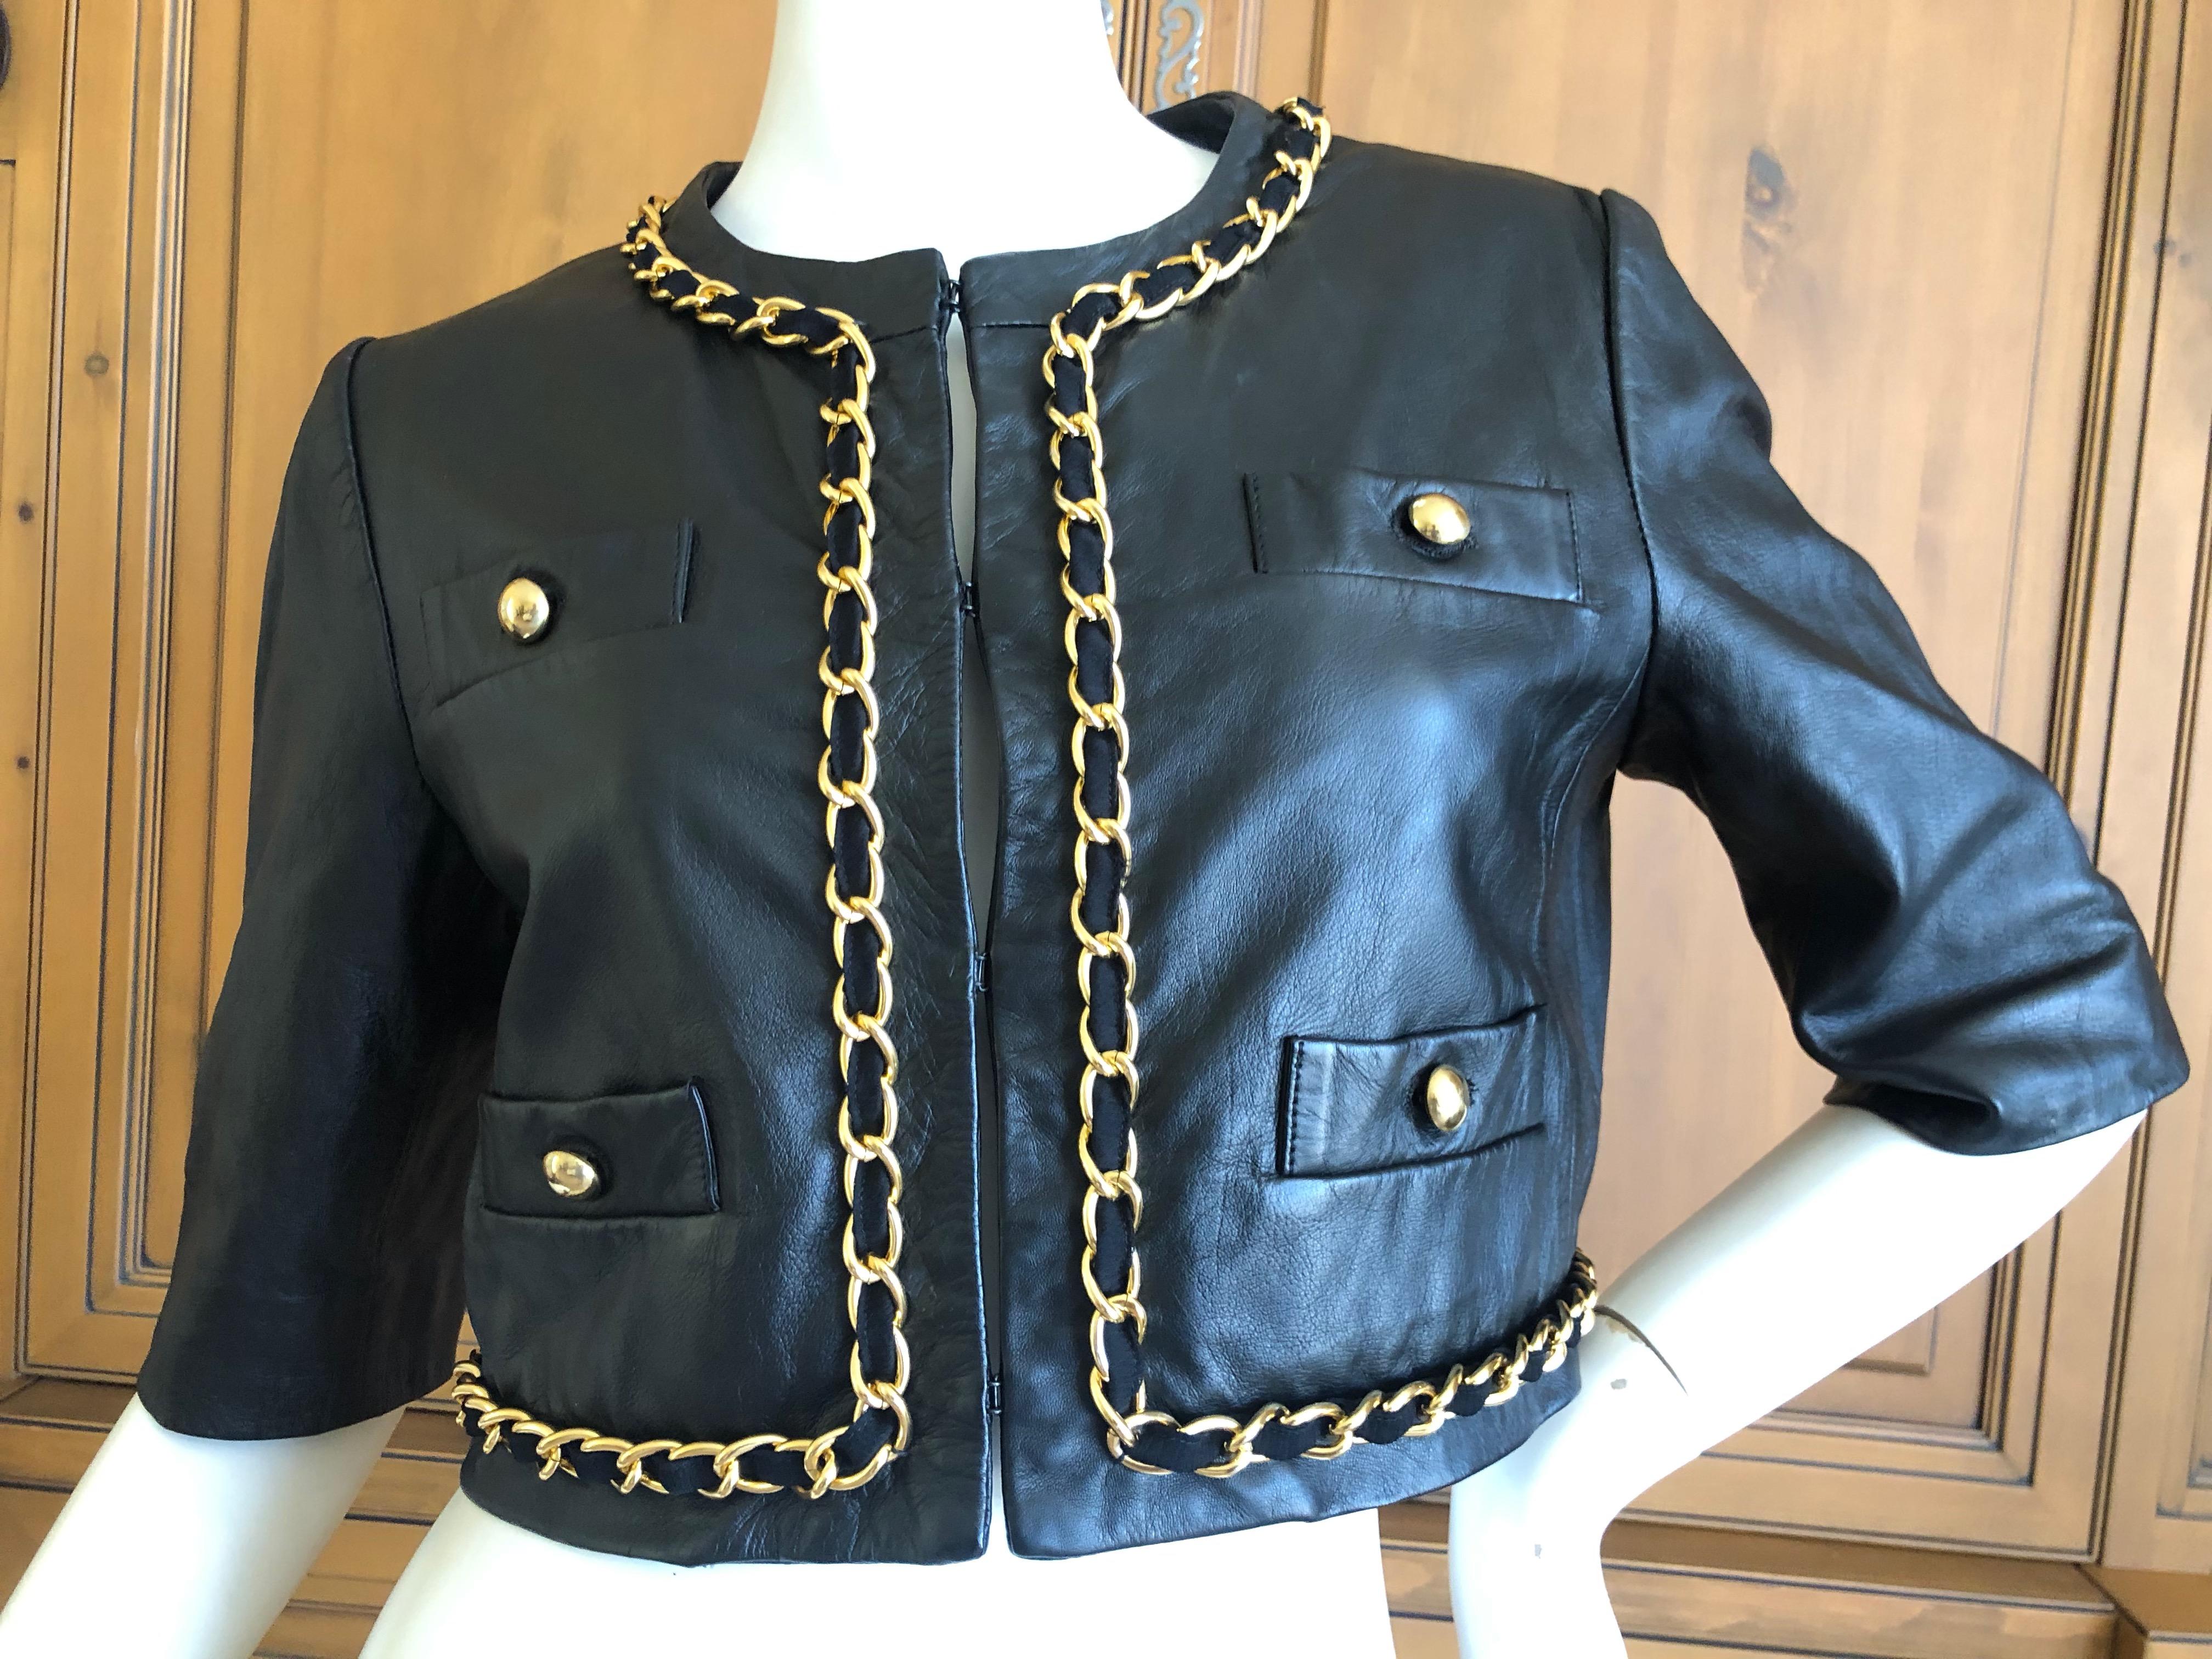 Moschino Cheap & Chic Vintage Cropped Black Lambskin Jacket with Gold Chain 
Size 10 US
Bust 38